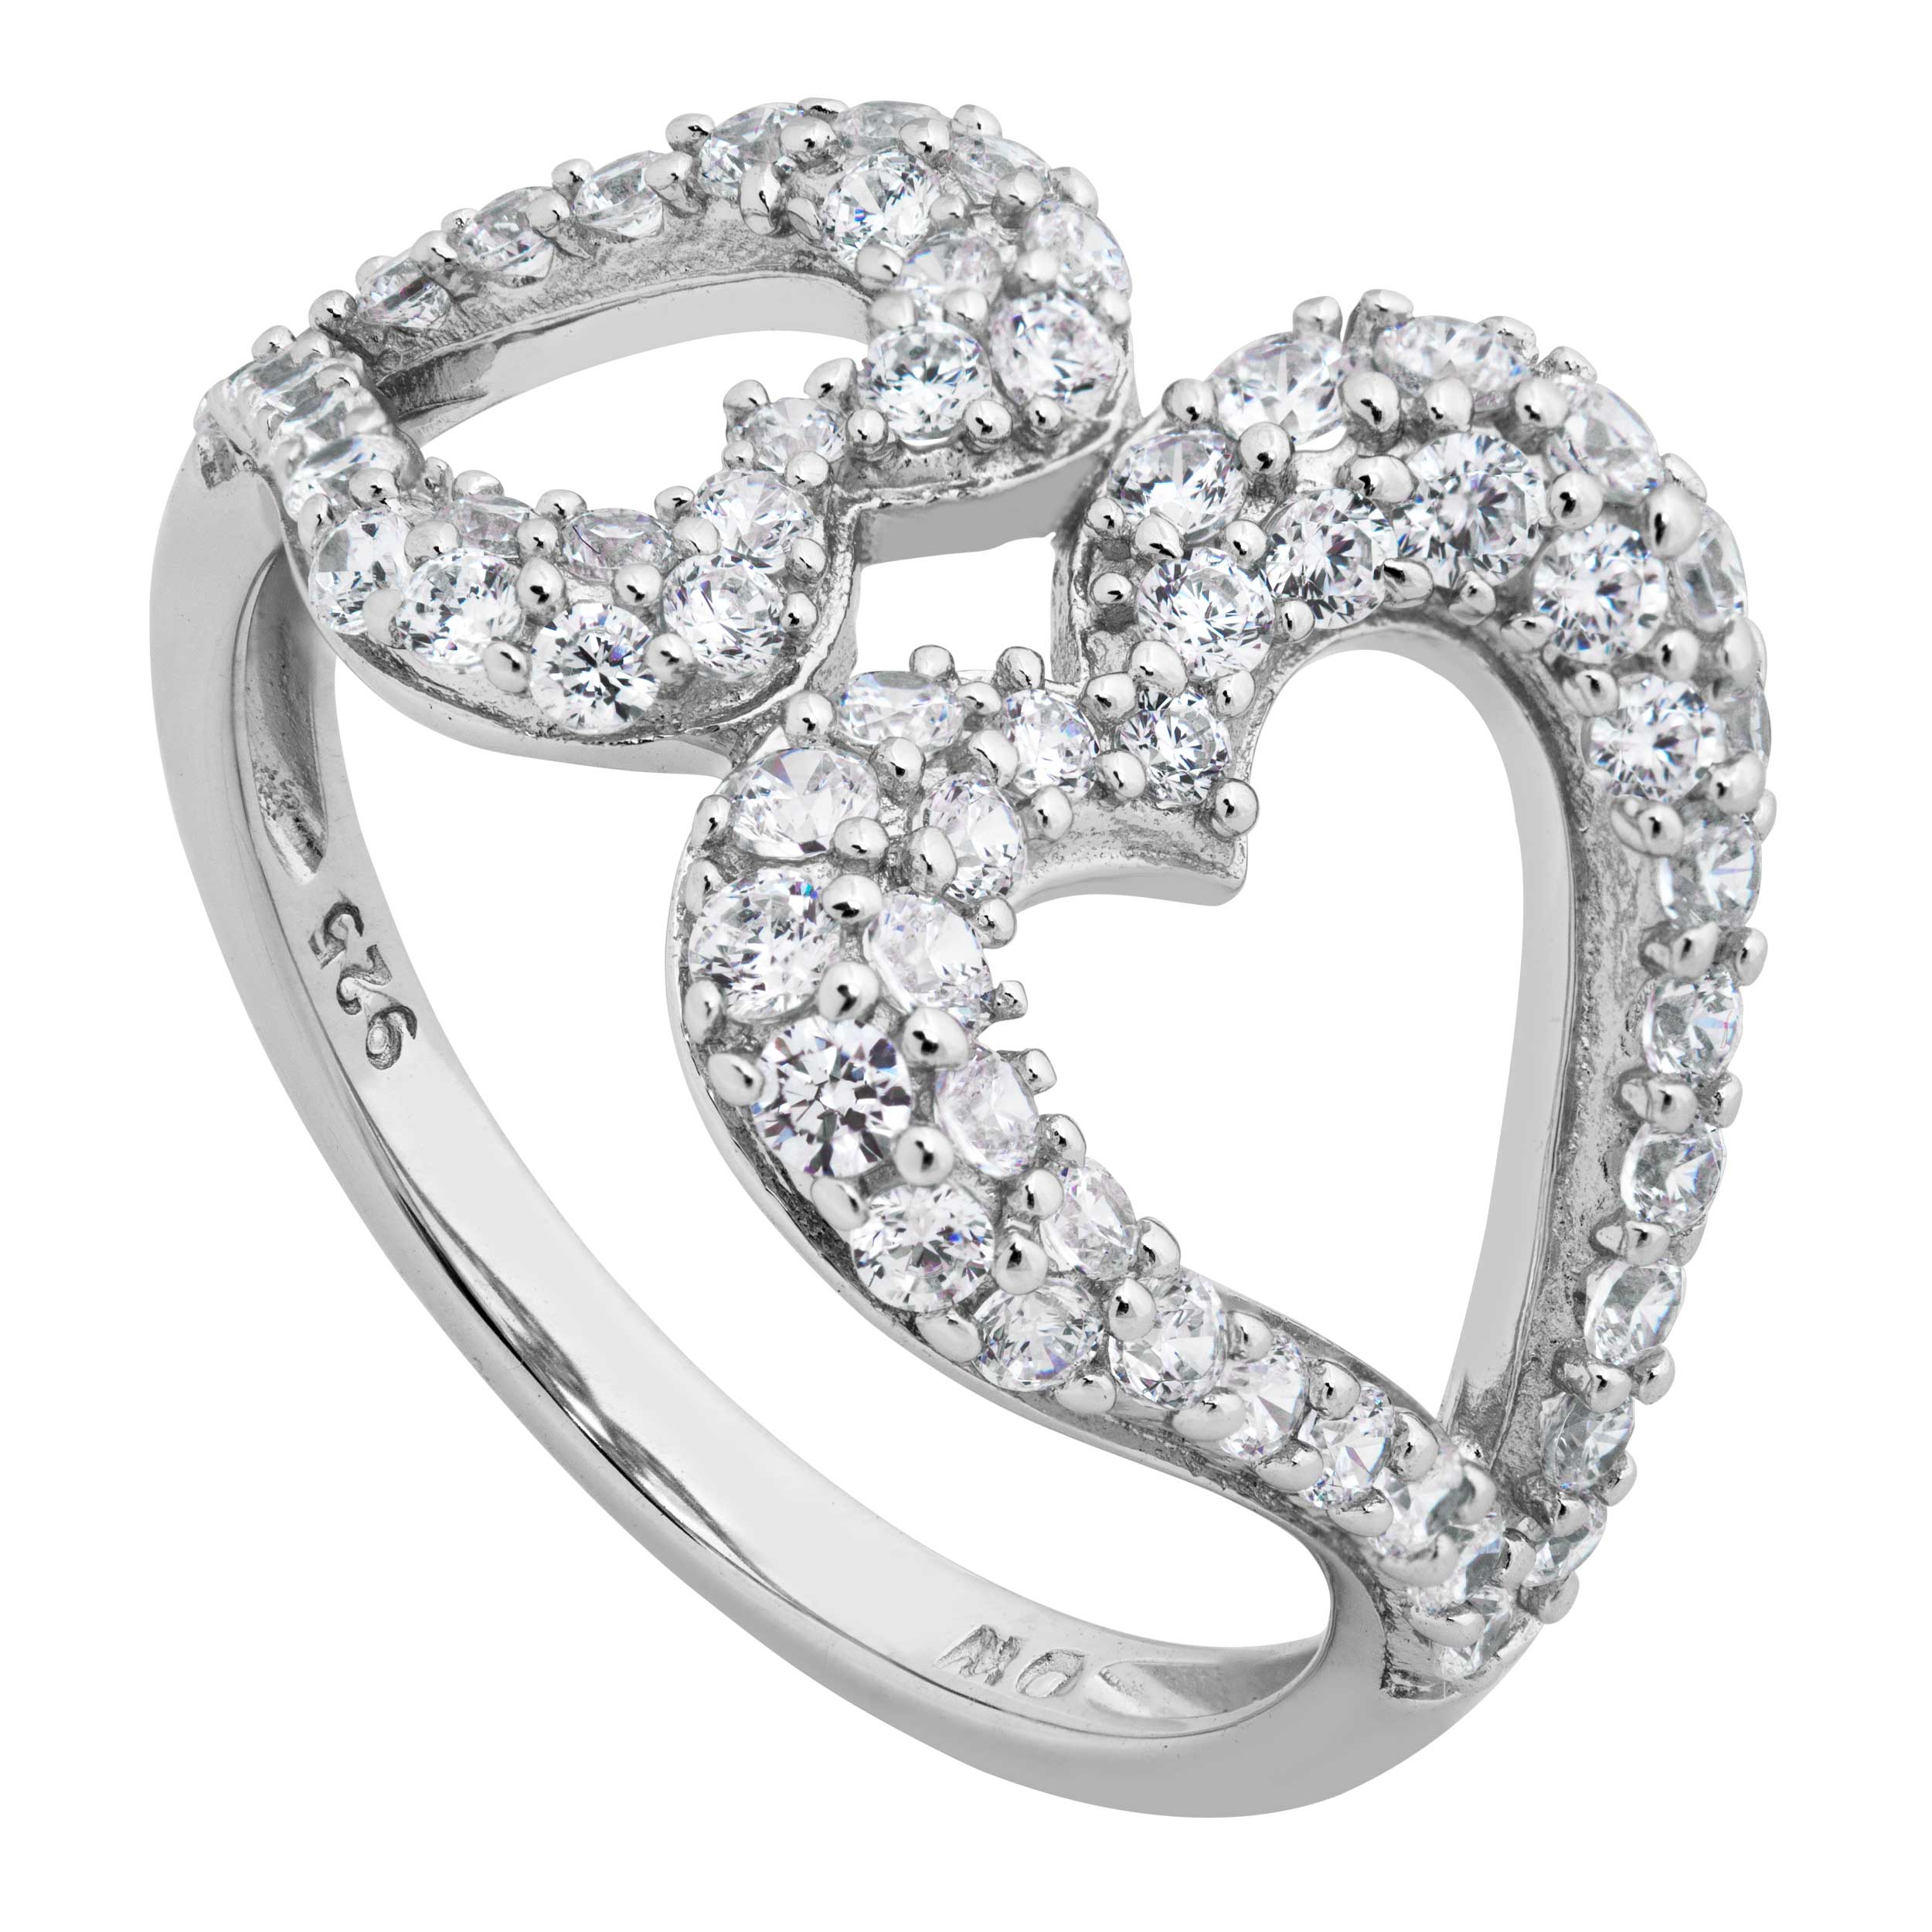 Graduated Twin Heart CZ's Ring, Sterling Silver. 